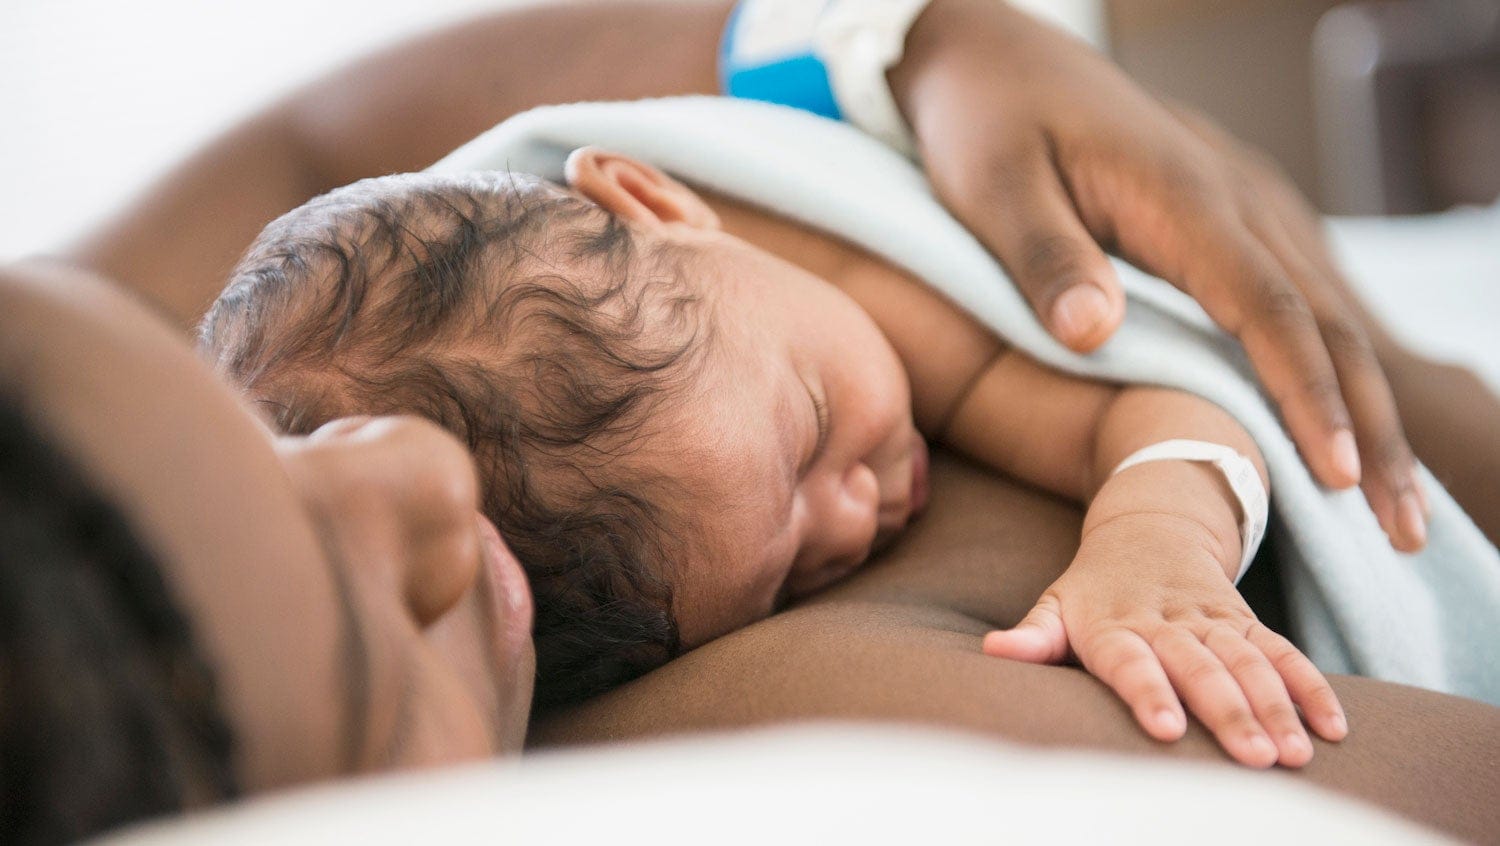 black mother and baby practice skin-to-skin care in hospital